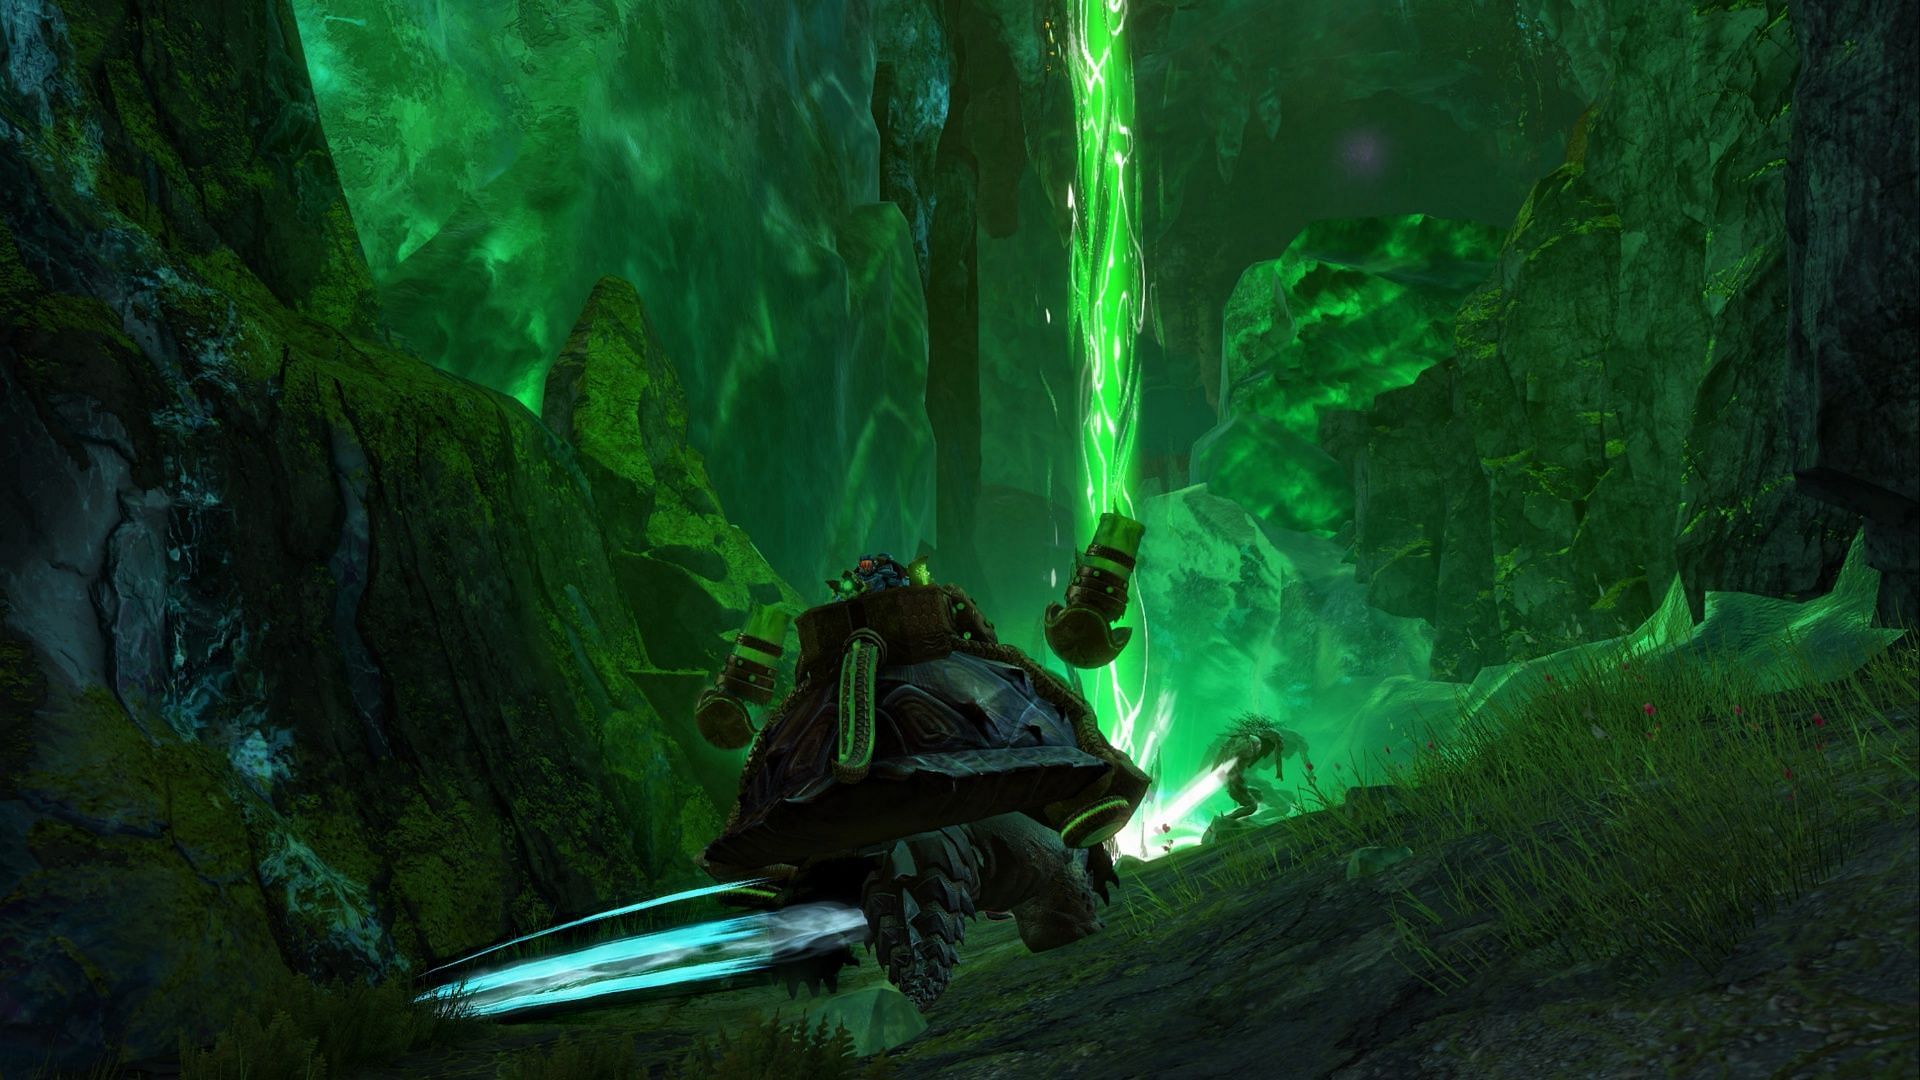 We spent some time in a preview of the latest Guild Wars 2 content.